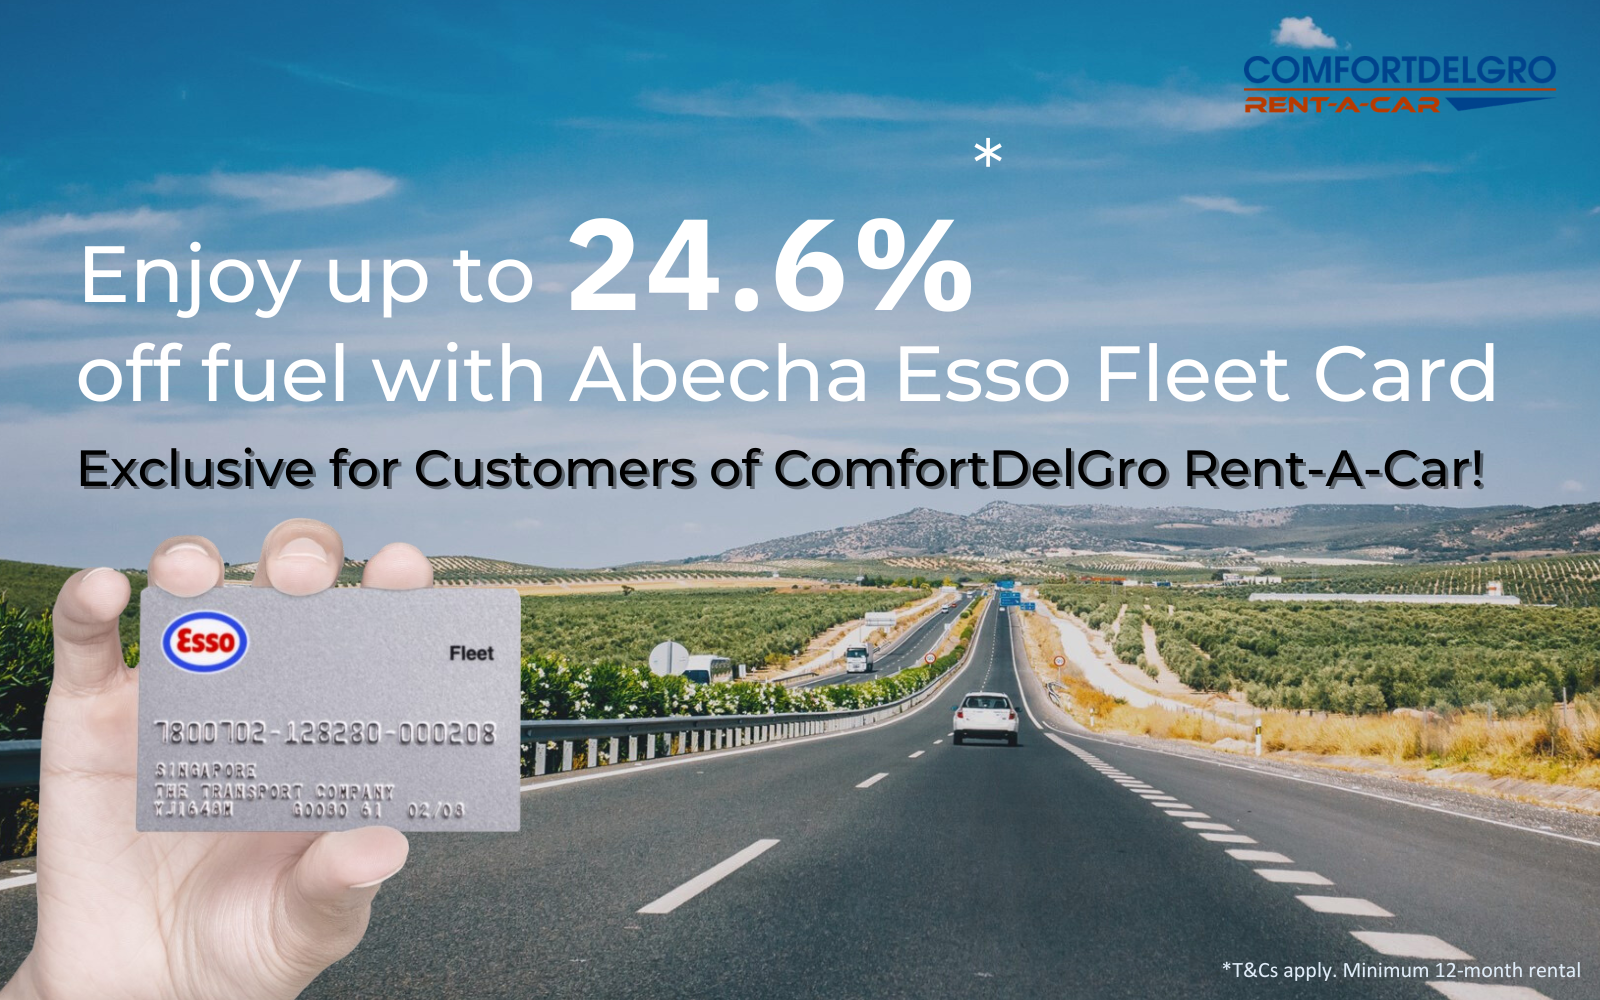 Enjoy up to 24.6%* off fuel with Abecha Esso Fleet Card